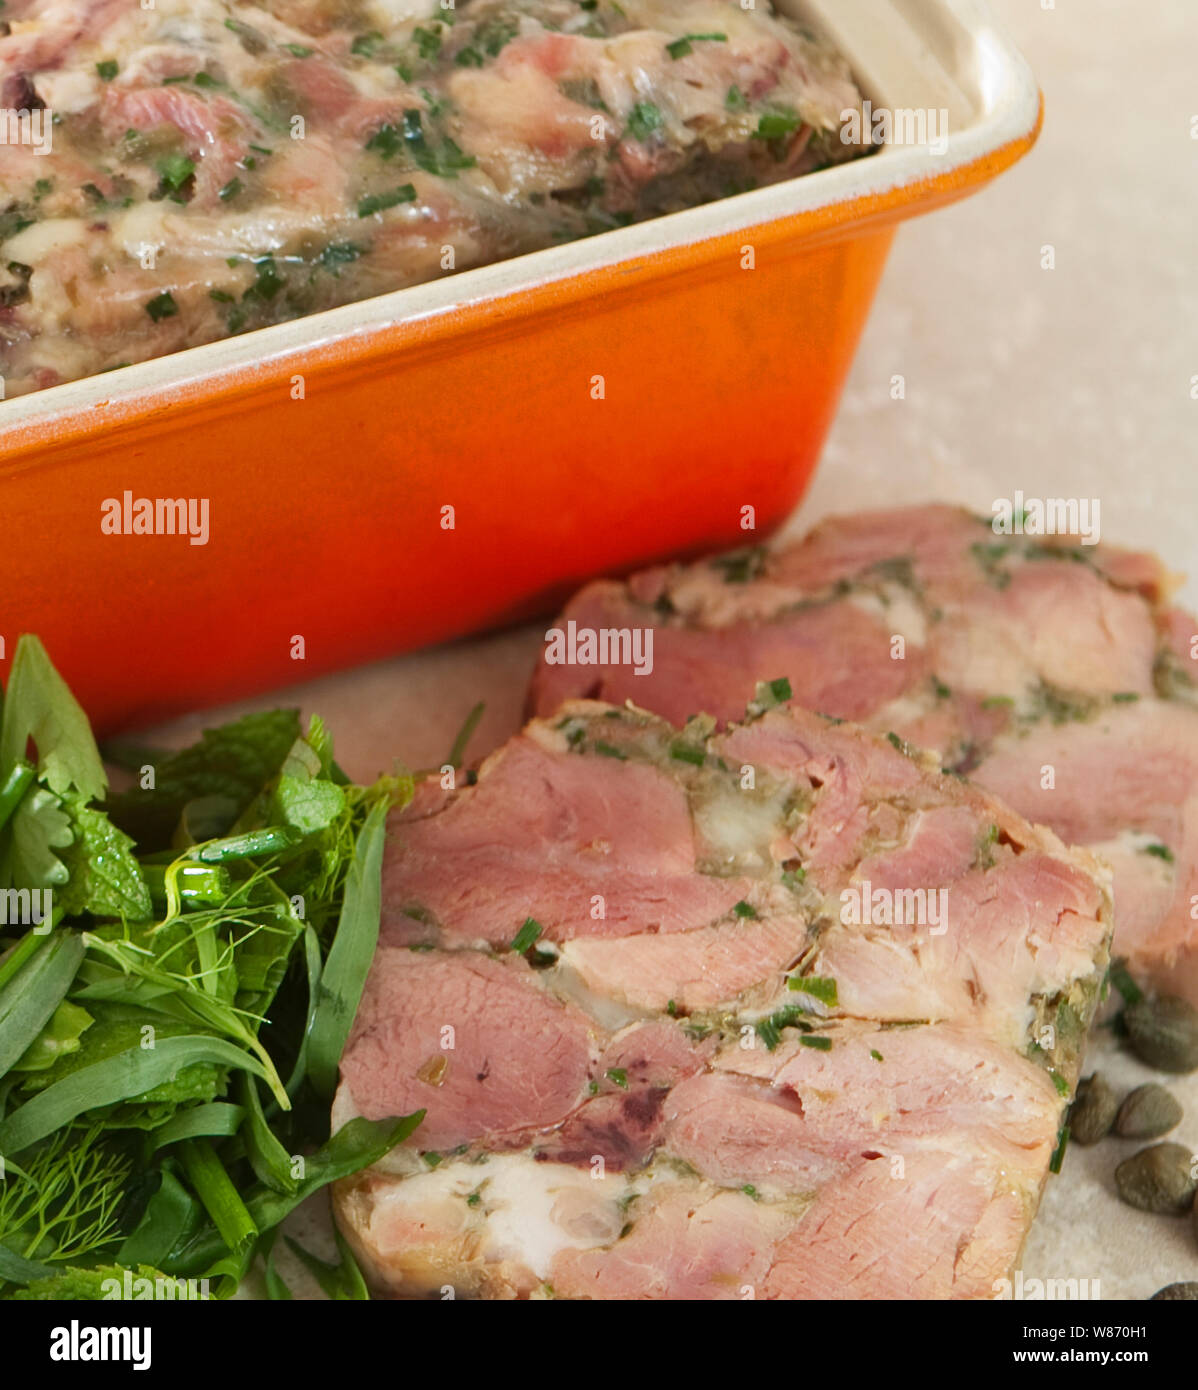 home made ham hock terrine in an orange terrine dish served with mayonnaise and herbs. Stock Photo